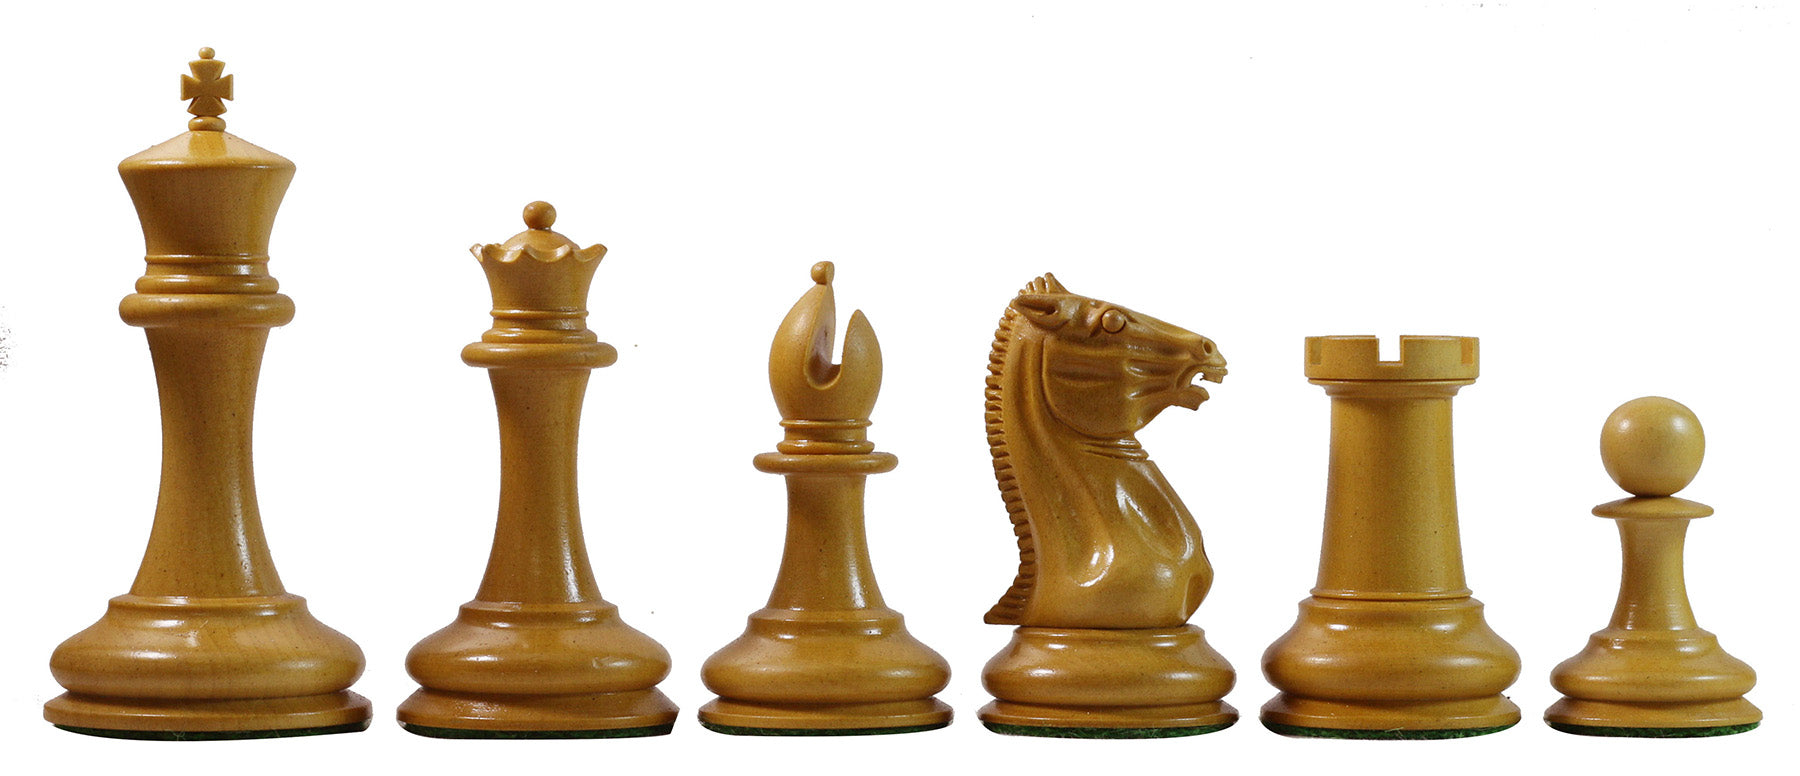 Wood Expressions Chess Pieces 3.5 English Staunton